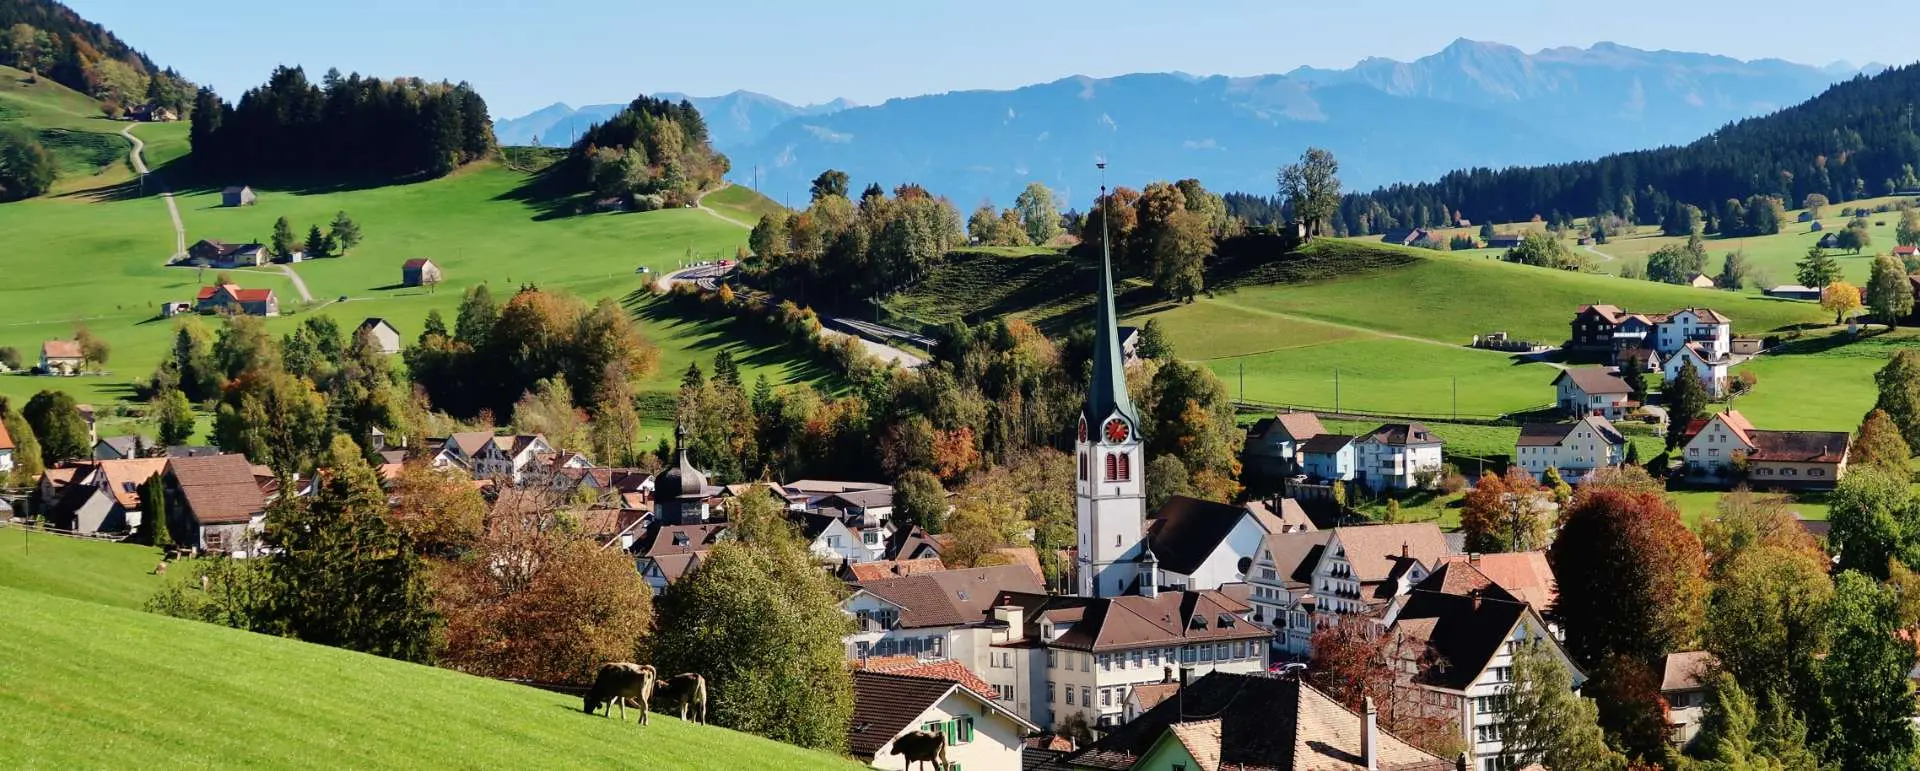 Appenzell - the destination for groups